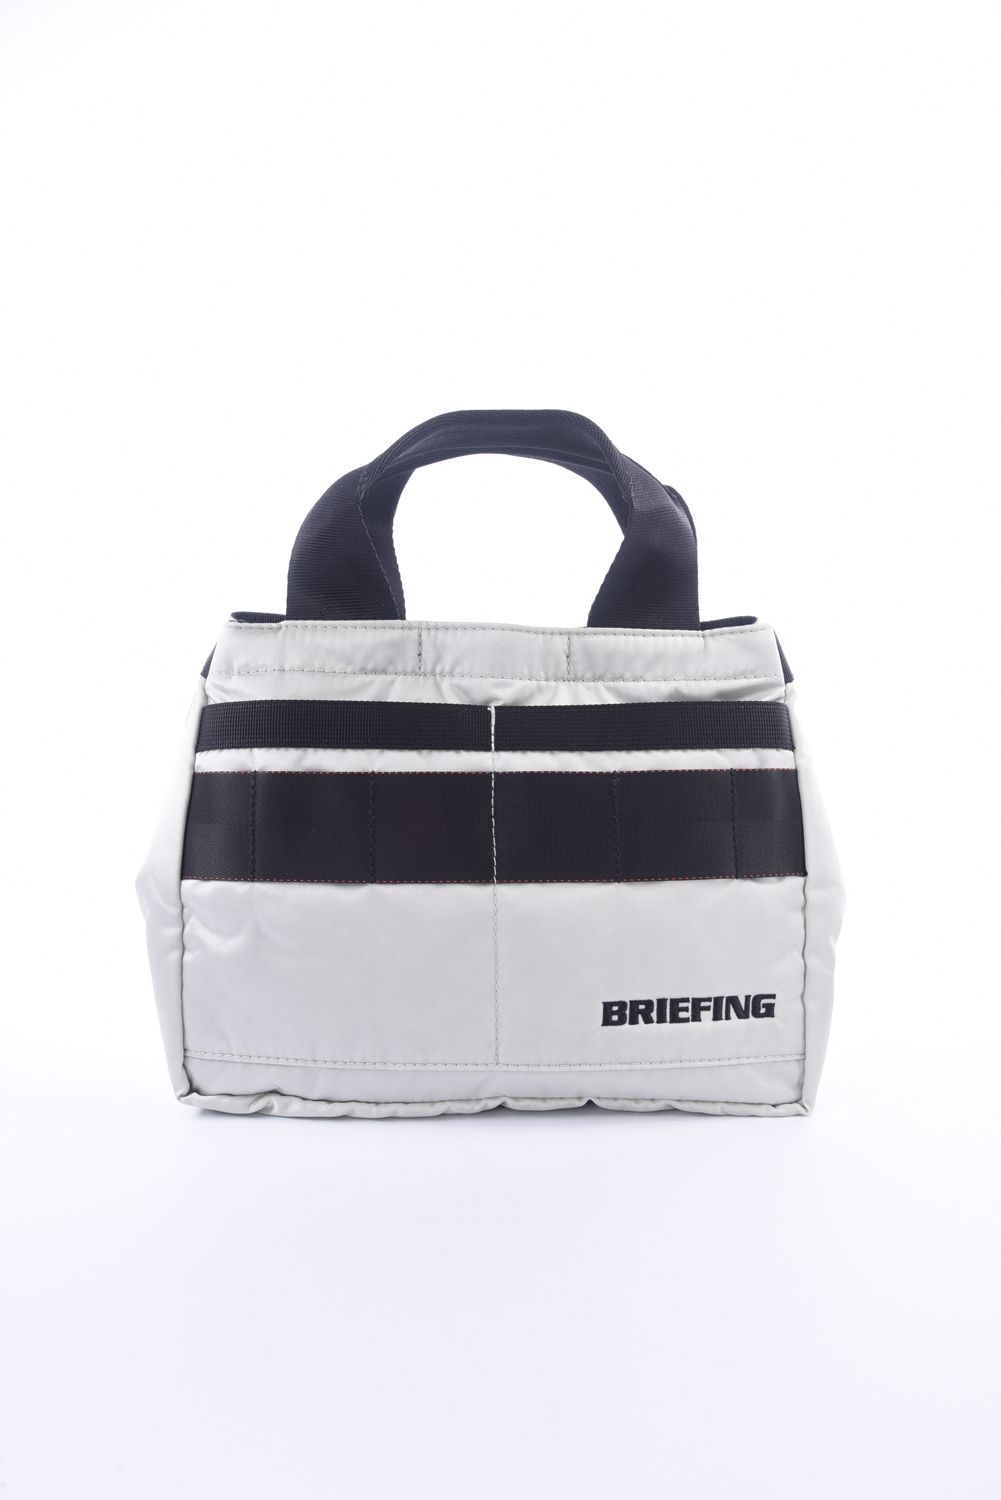 BRIEFING - 【HOLIDAY COLLECTION】 CART TOTE HOLIDAY ...